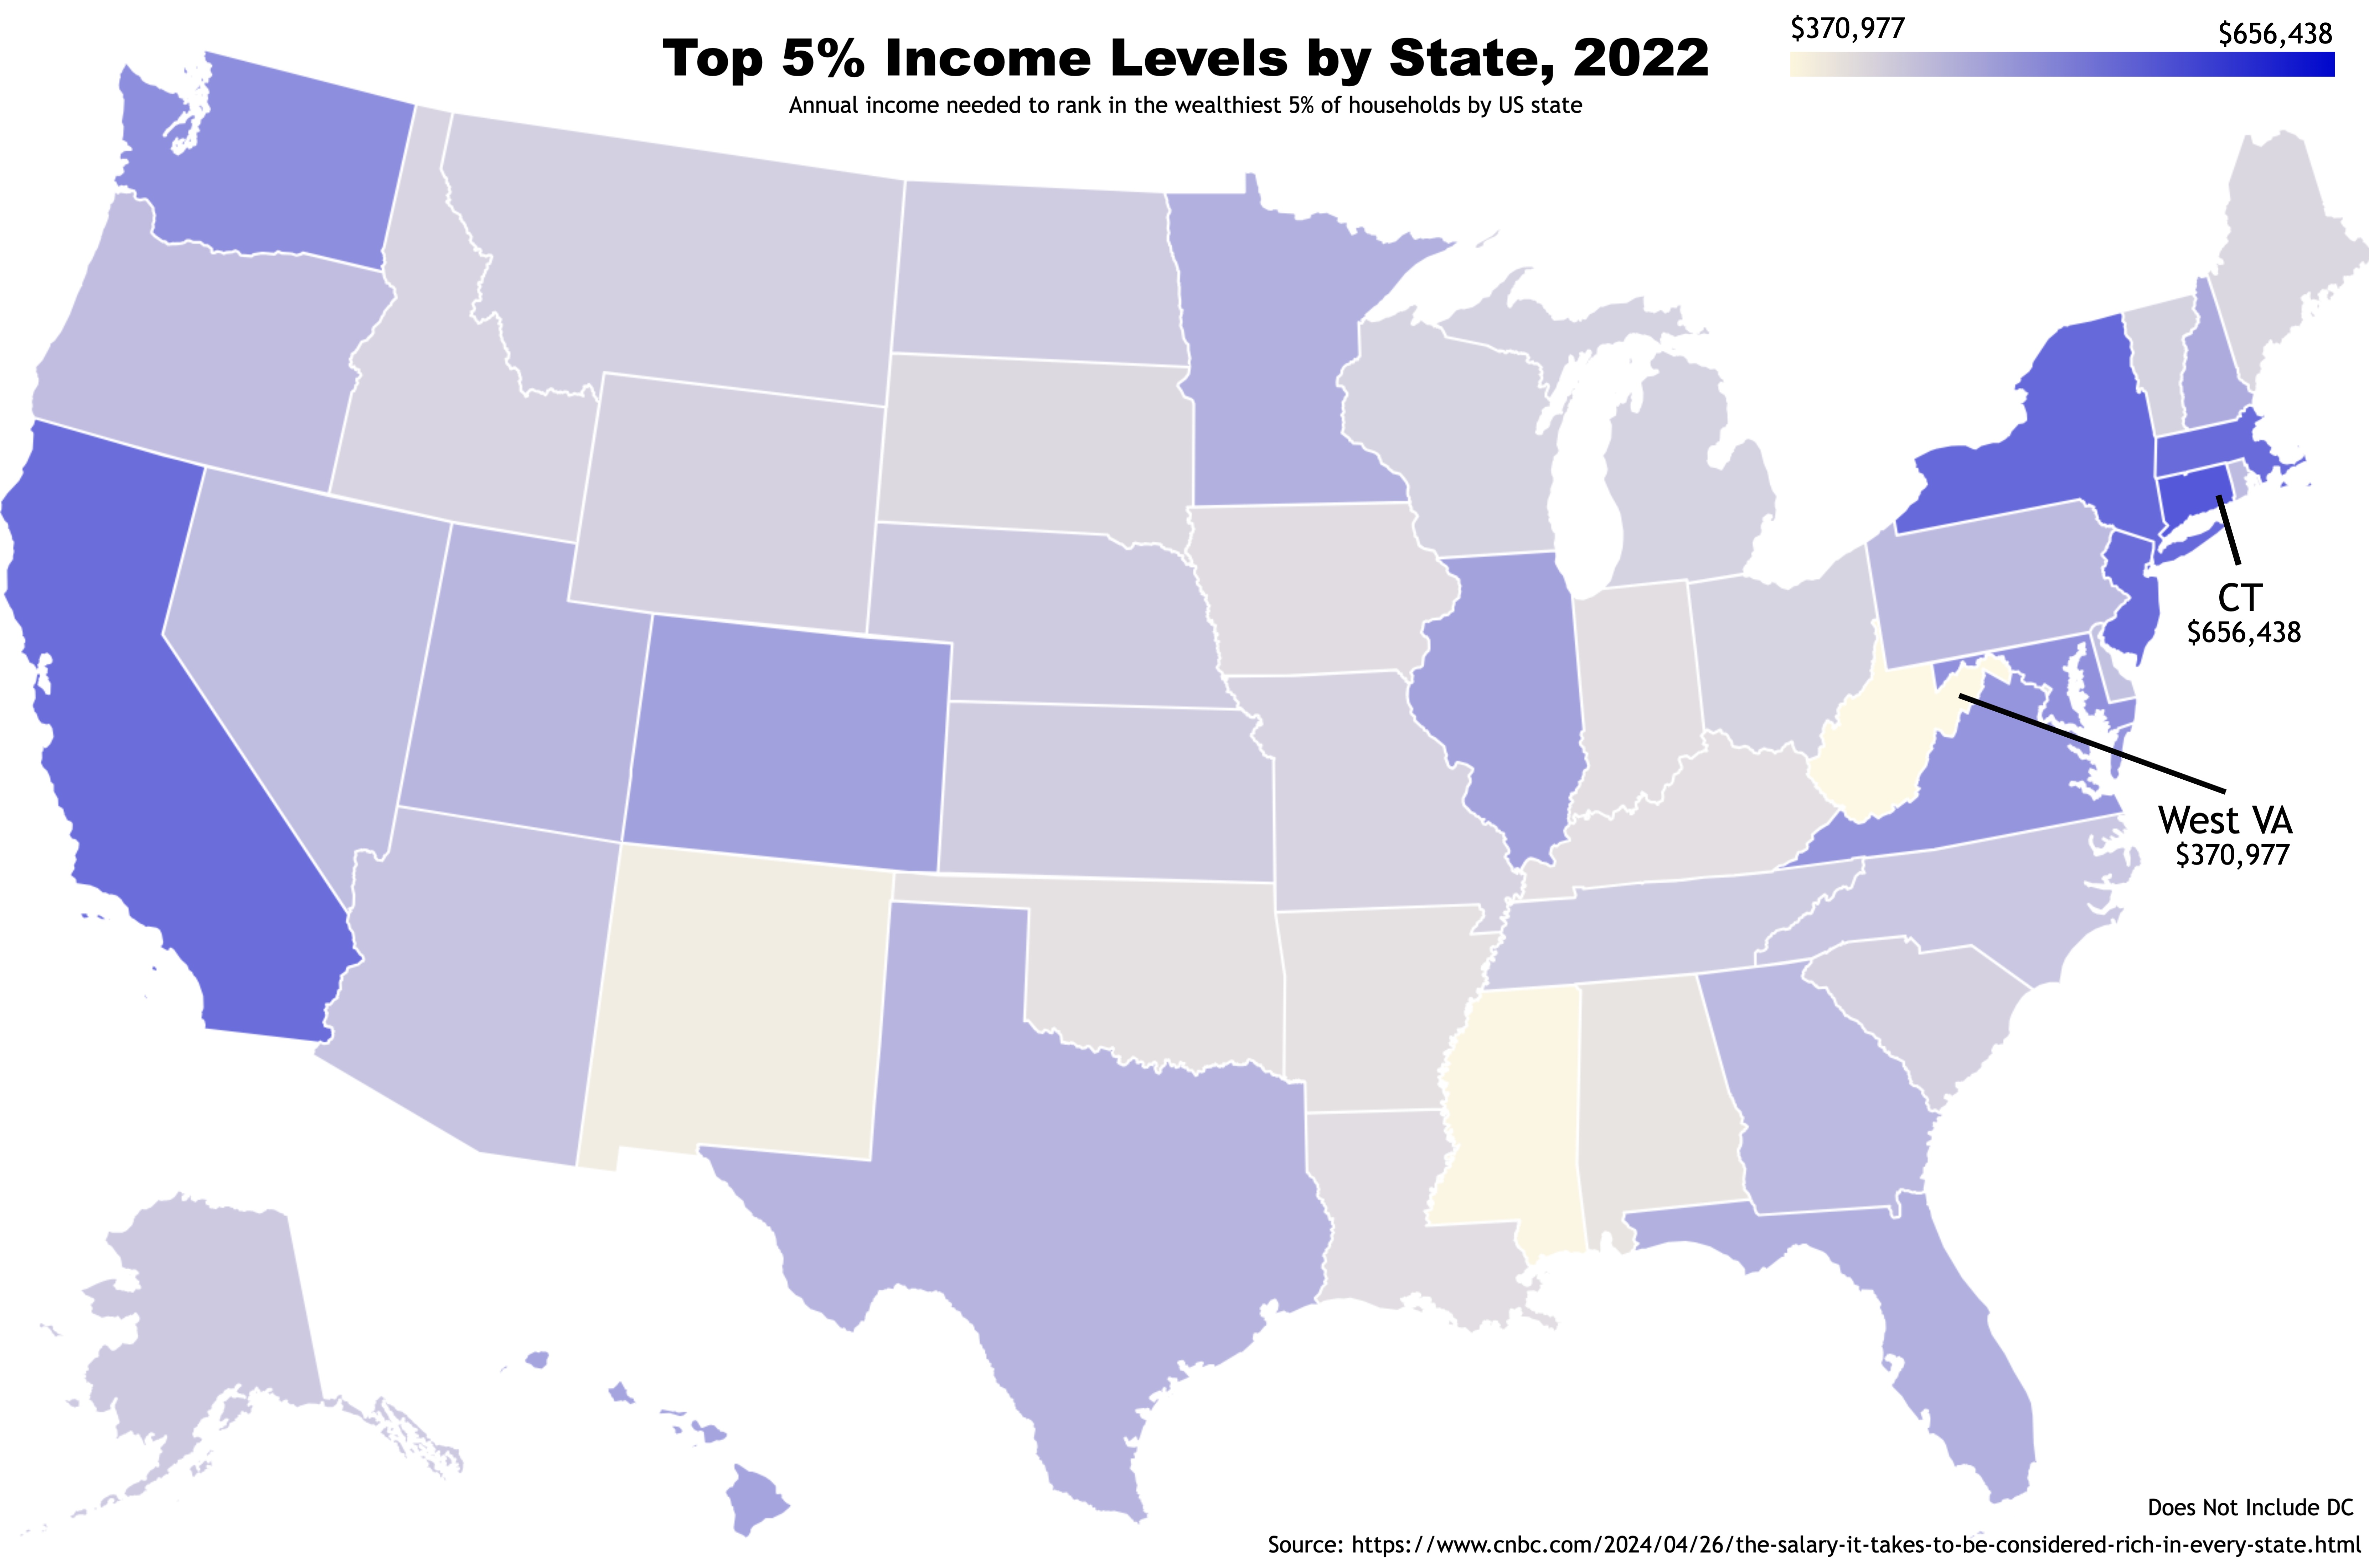 Top 5% Income Levels by State, 2022